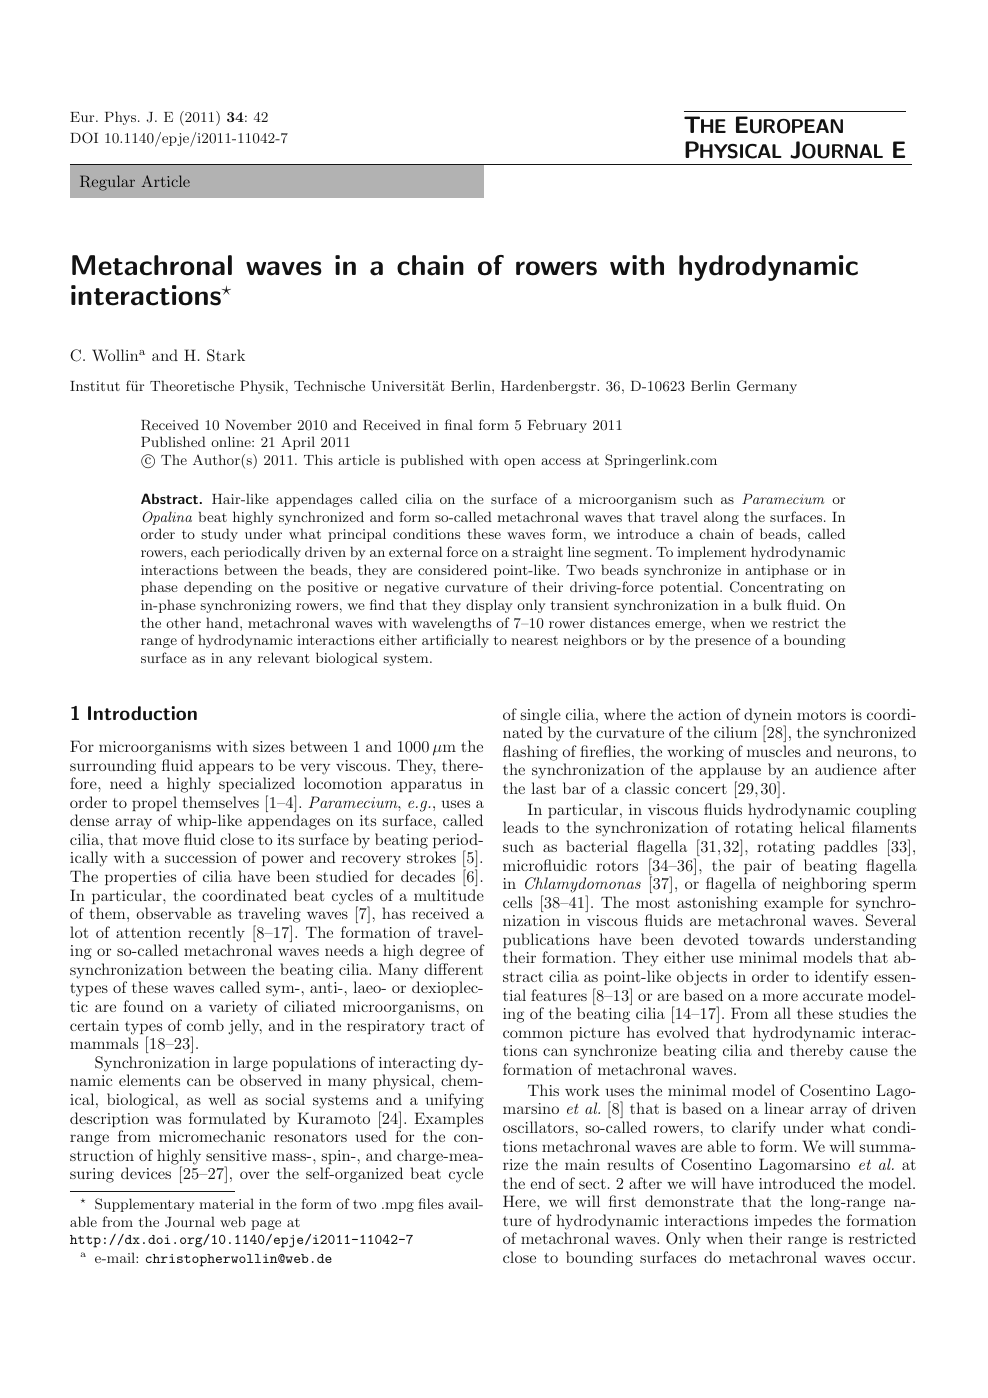 Metachronal Waves In A Chain Of Rowers With Hydrodynamic Interactions Topic Of Research Paper In Physical Sciences Download Scholarly Article Pdf And Read For Free On Cyberleninka Open Science Hub